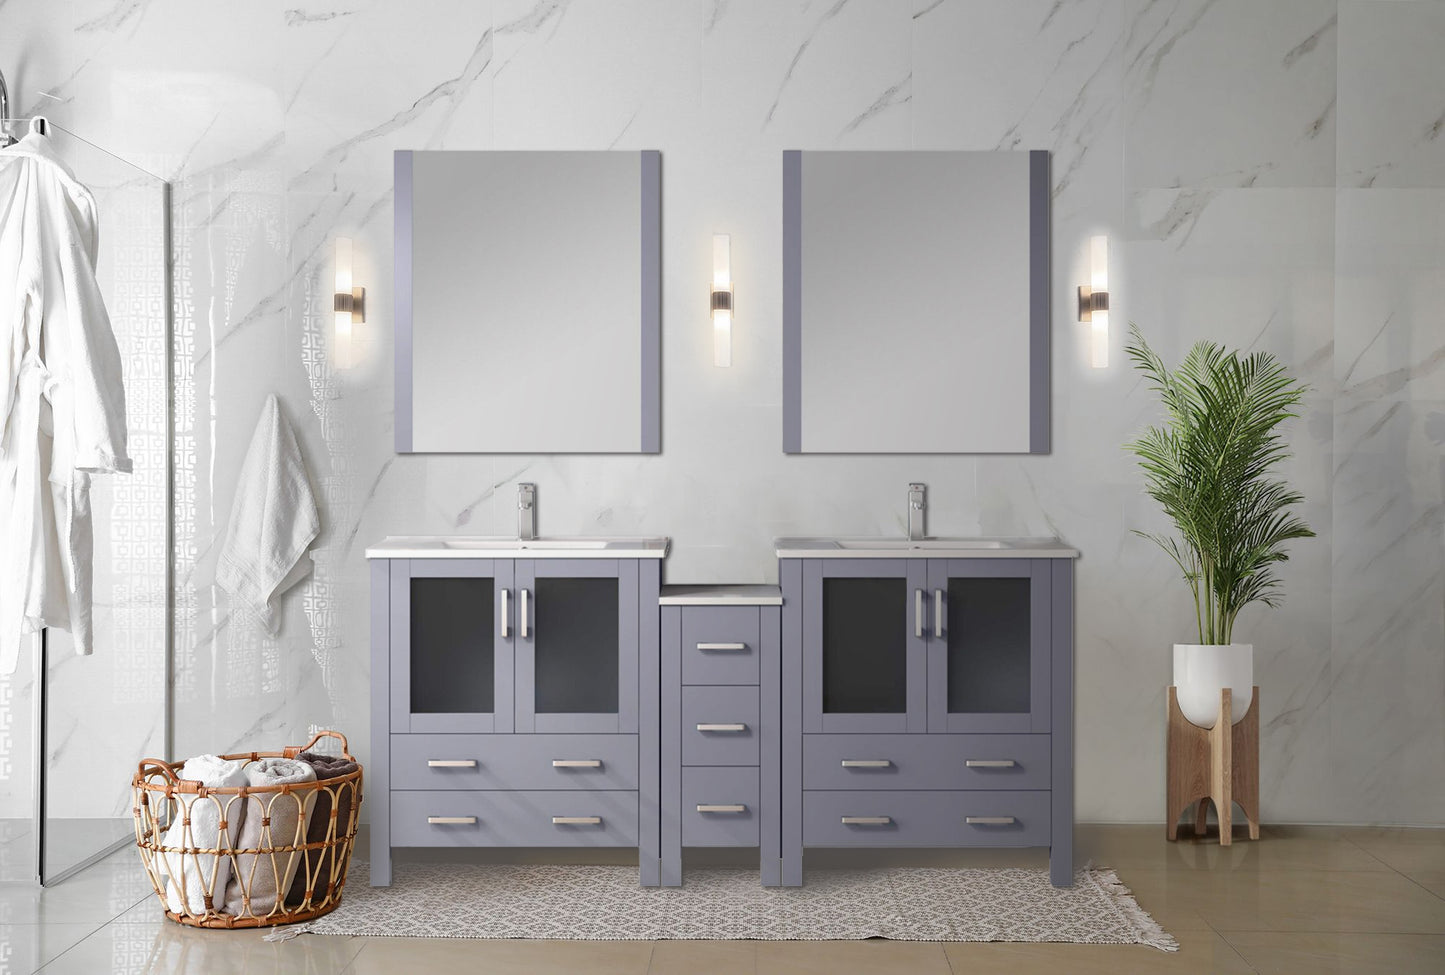 Lexora Collection Volez 72 inch Double Bath Vanity with Side Cabinet, and White Ceramic Top - Luxe Bathroom Vanities